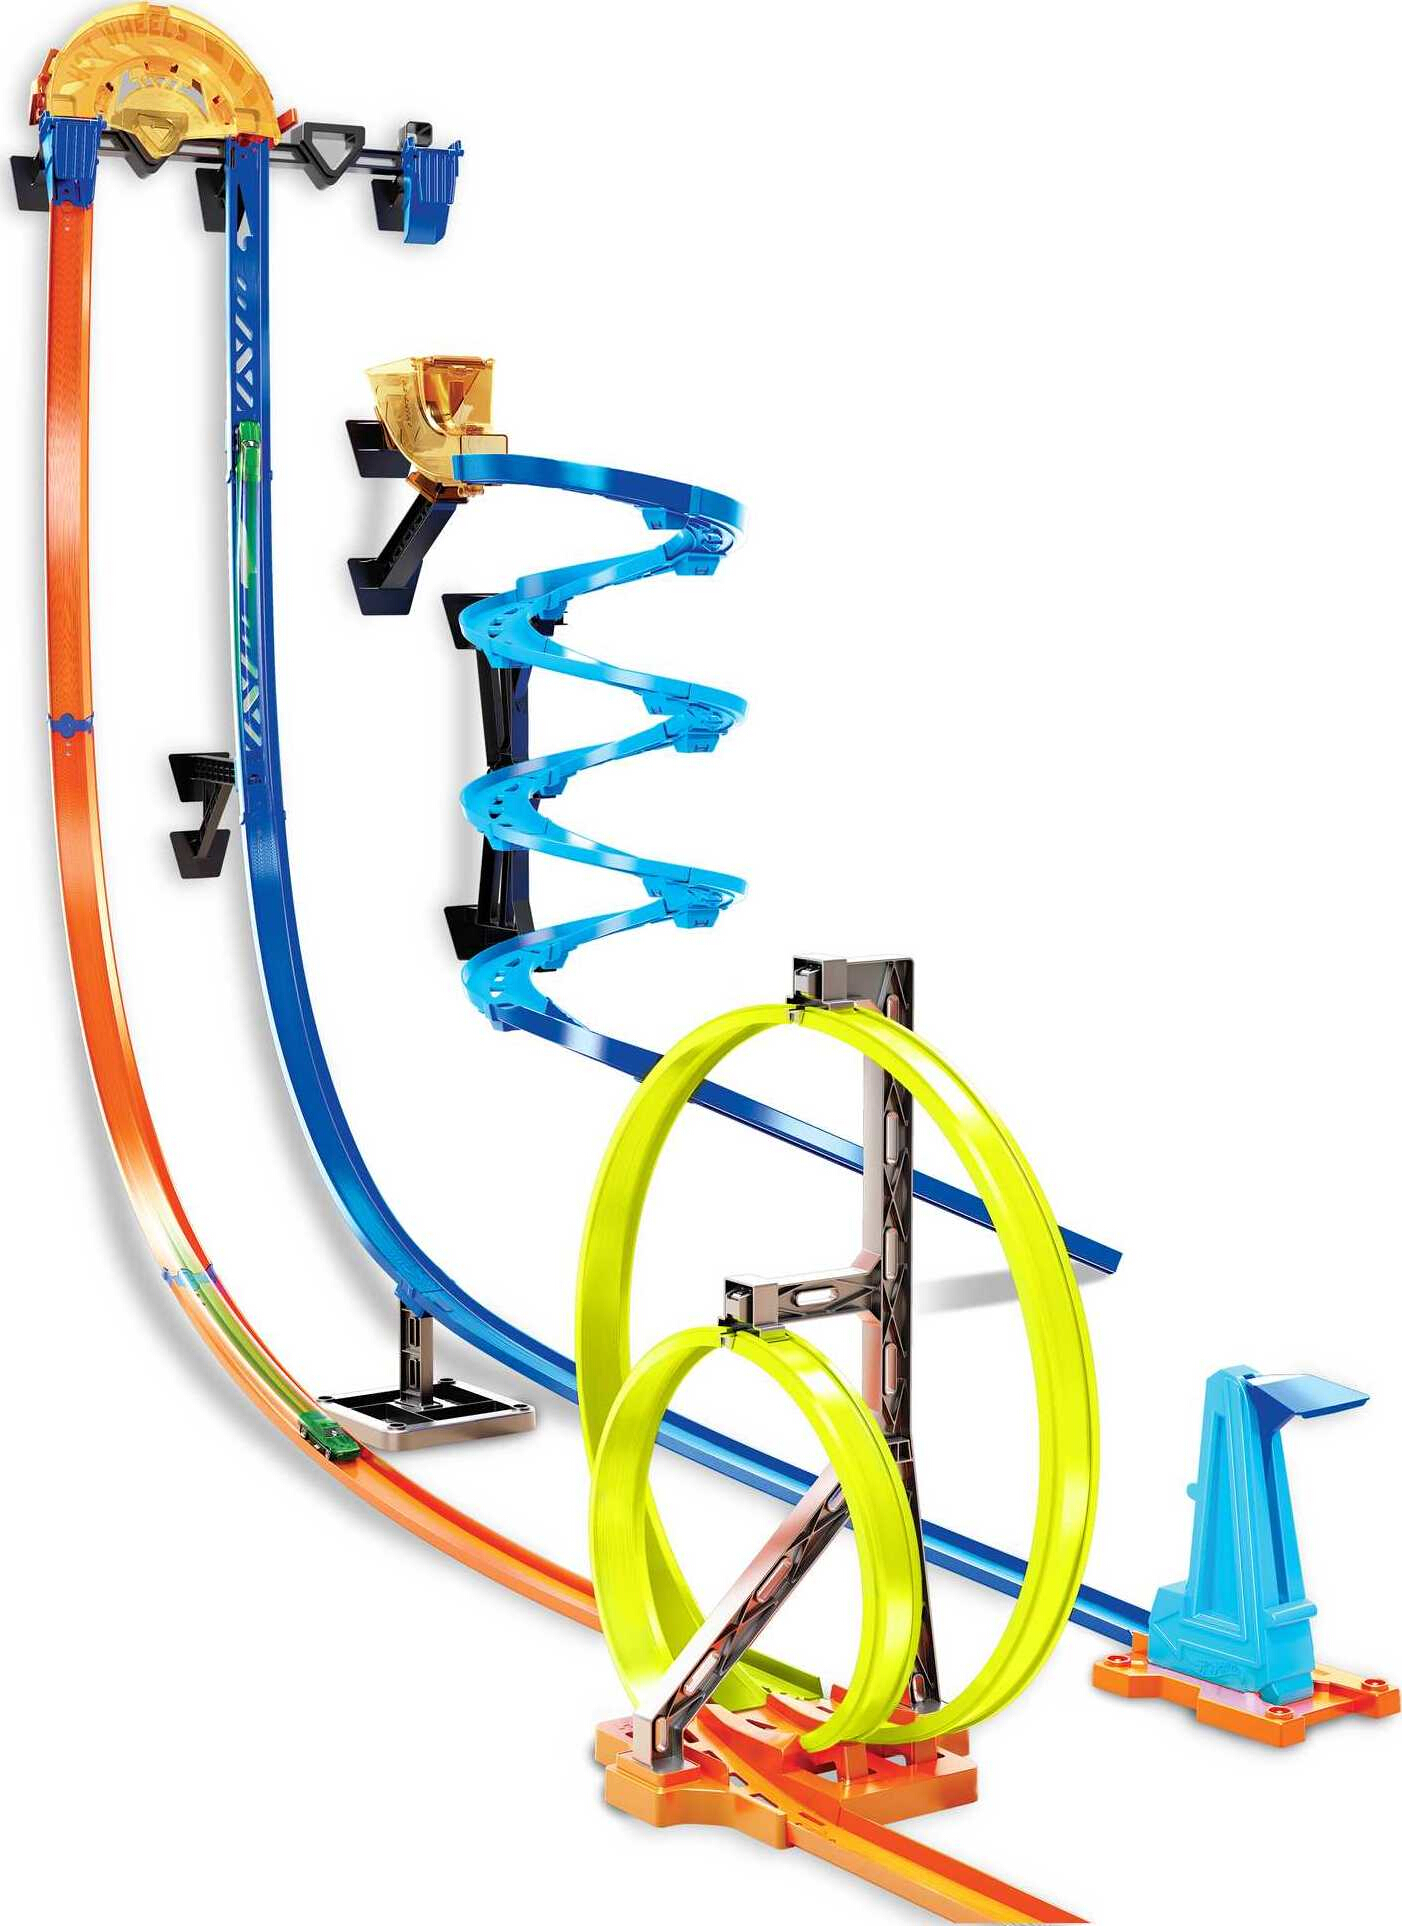 Hot Wheels Track Builder Vertical Launch Kit, 50-in Tall, 3 Configurations & 1 Toy Car - image 1 of 6